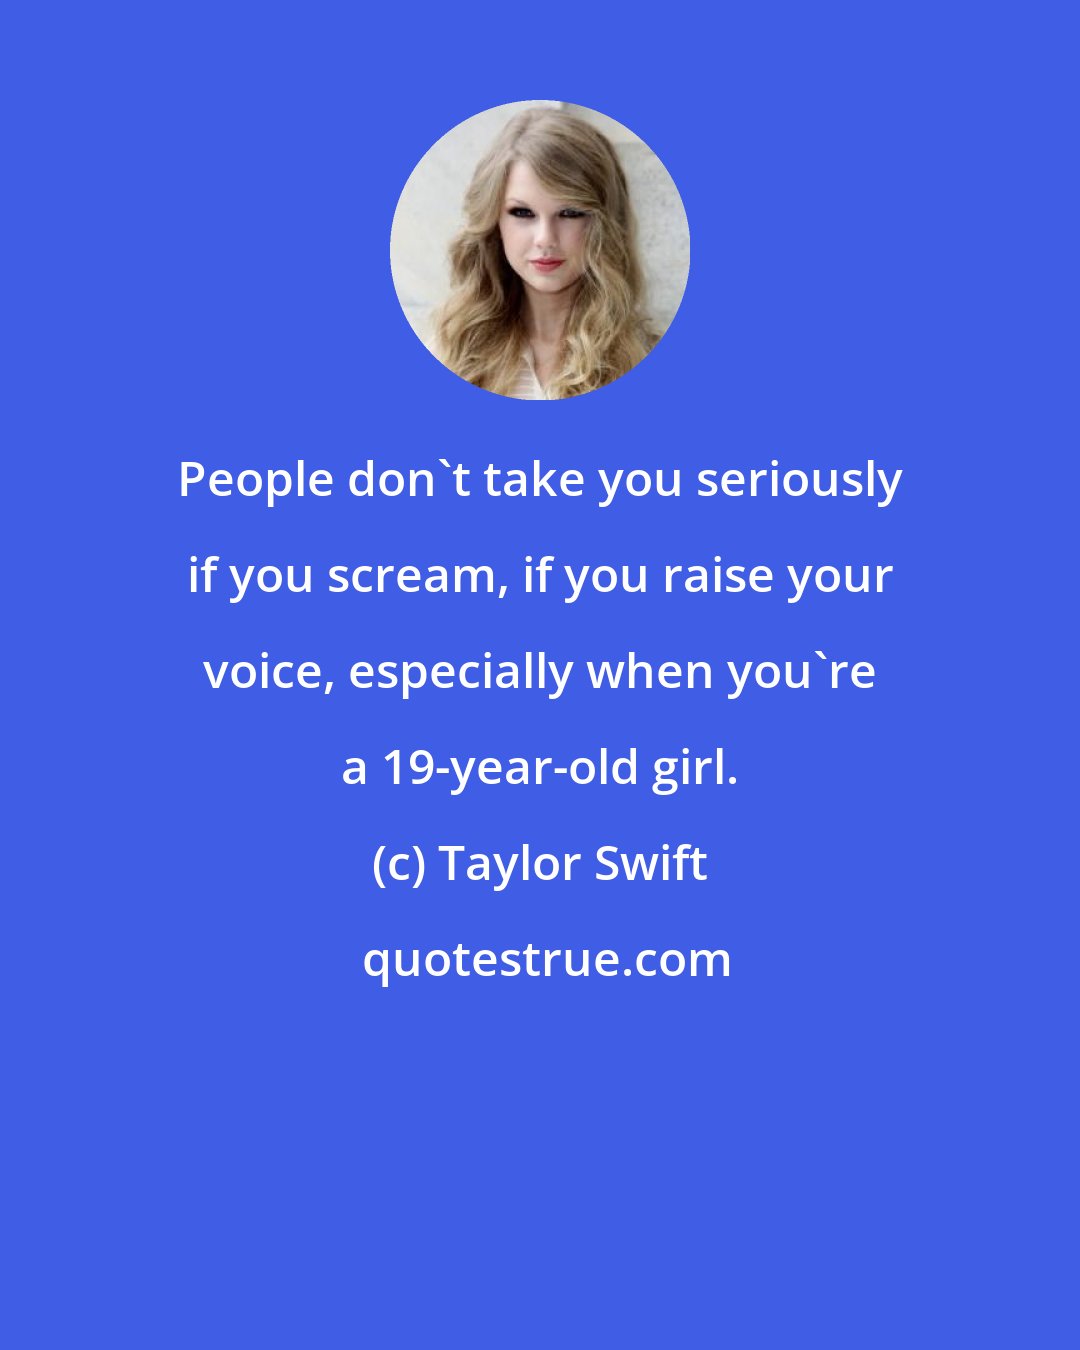 Taylor Swift: People don't take you seriously if you scream, if you raise your voice, especially when you're a 19-year-old girl.